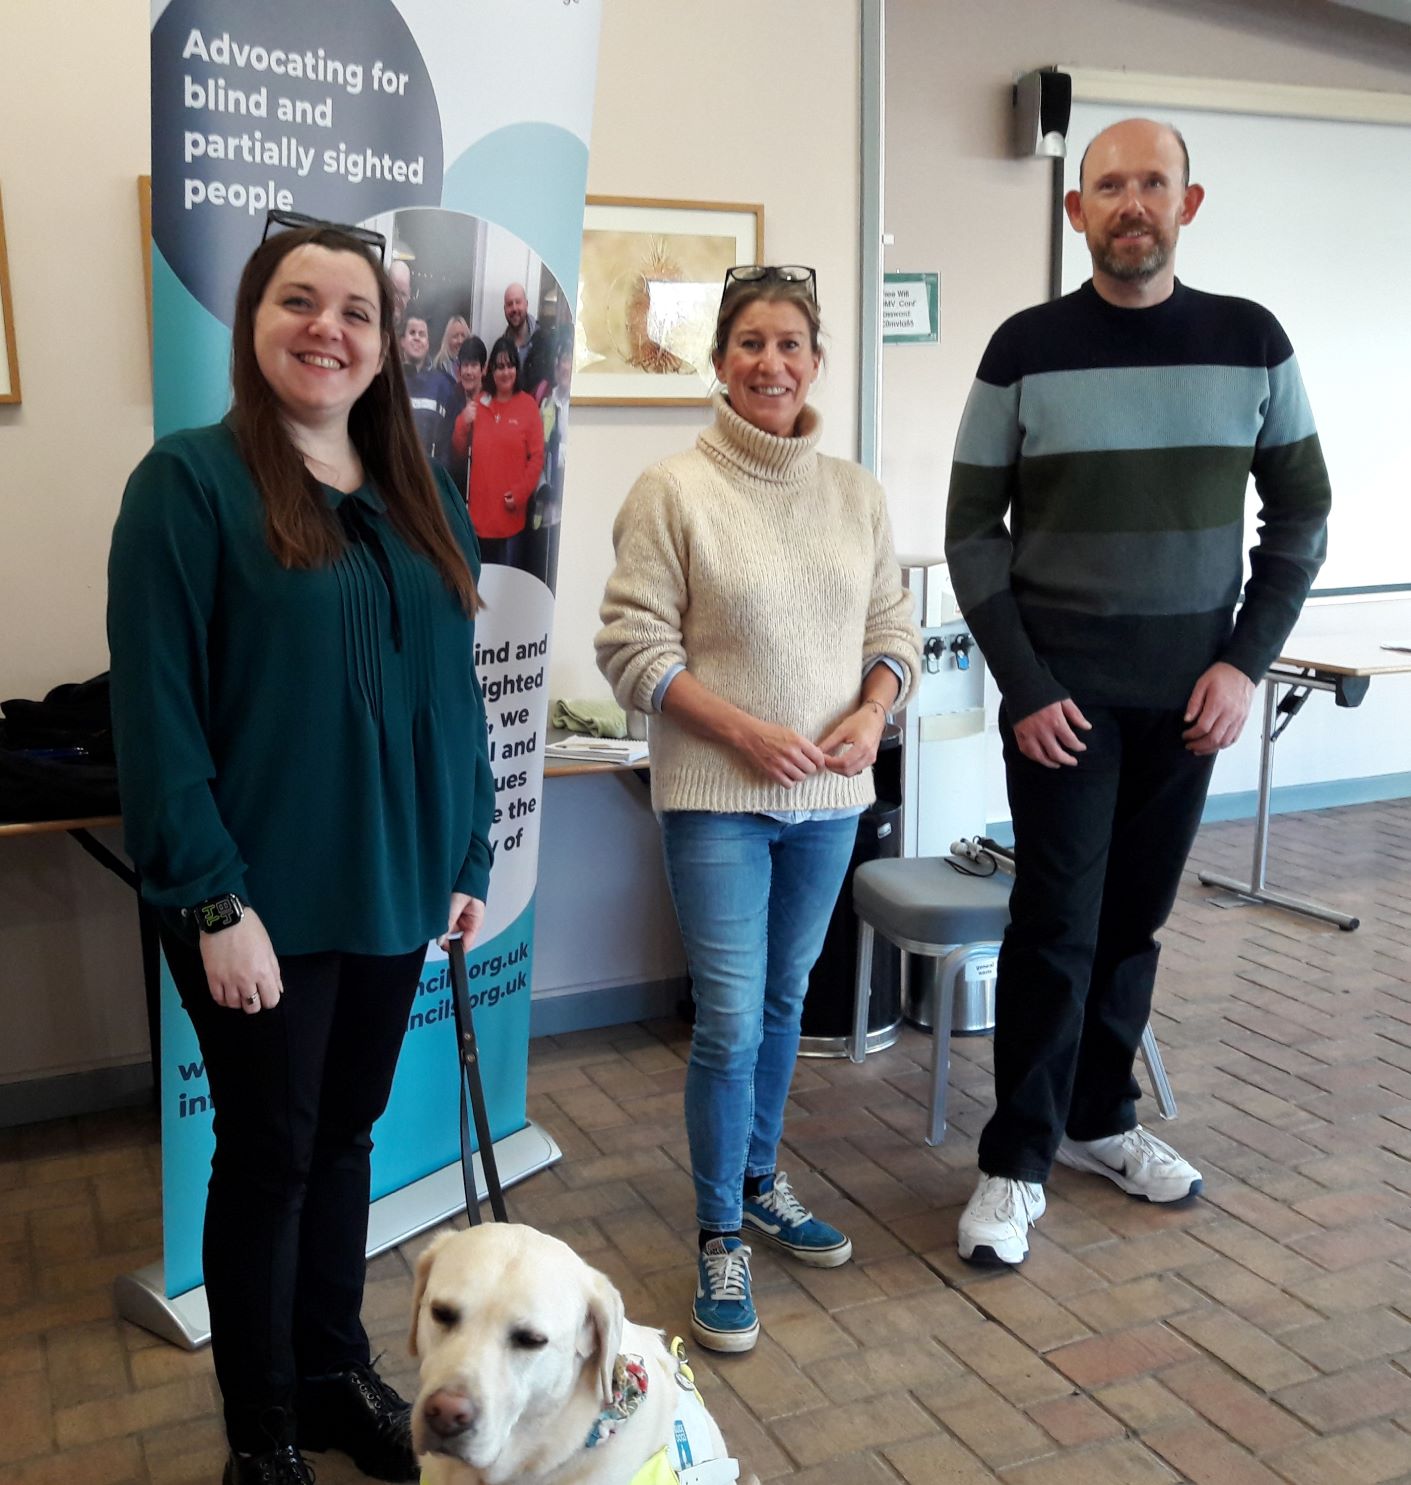 From left to right: Bedfordshire Engagement Manager, Sam Leftwich, Jo Roberts, Community Manager at Marston Vale, and SLC member Stefan Cocker. are standing by the SL banner, with guide dog Lizzie.